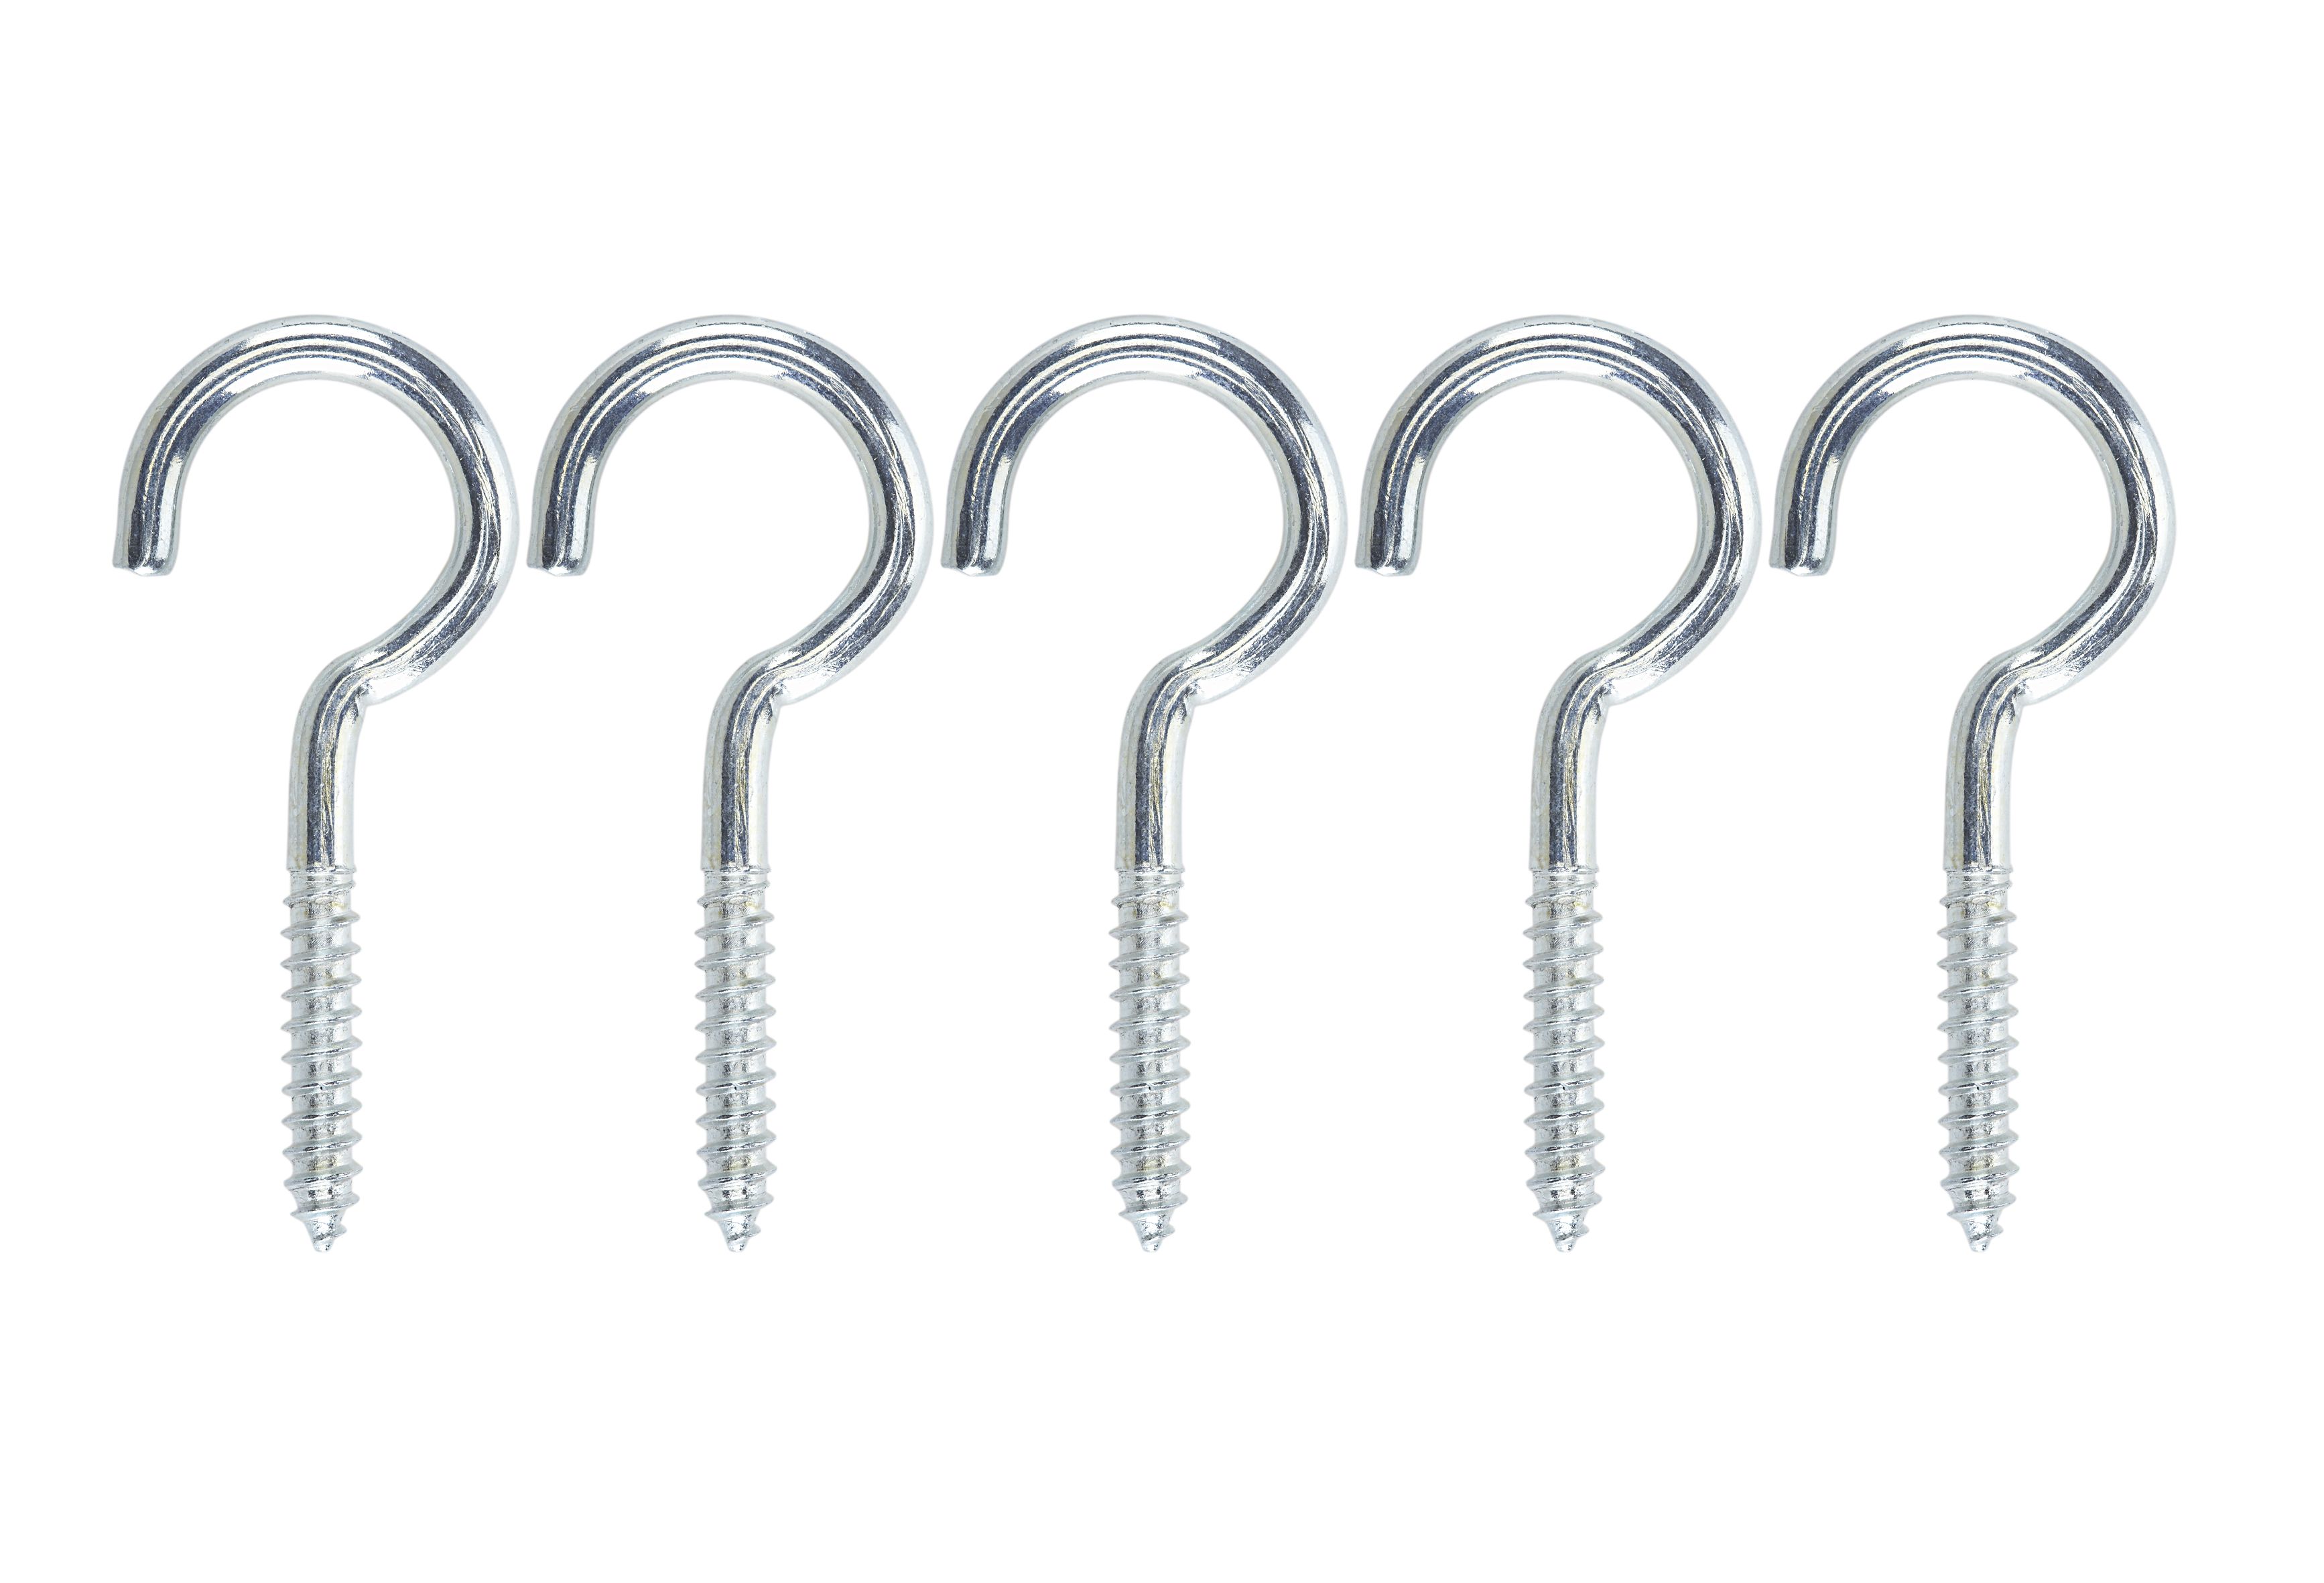 https://kingfisher.scene7.com/is/image/Kingfisher/zinc-plated-medium-cup-hook-l-80mm-pack-of-10~03210604_07c?$MOB_PREV$&$width=618&$height=618